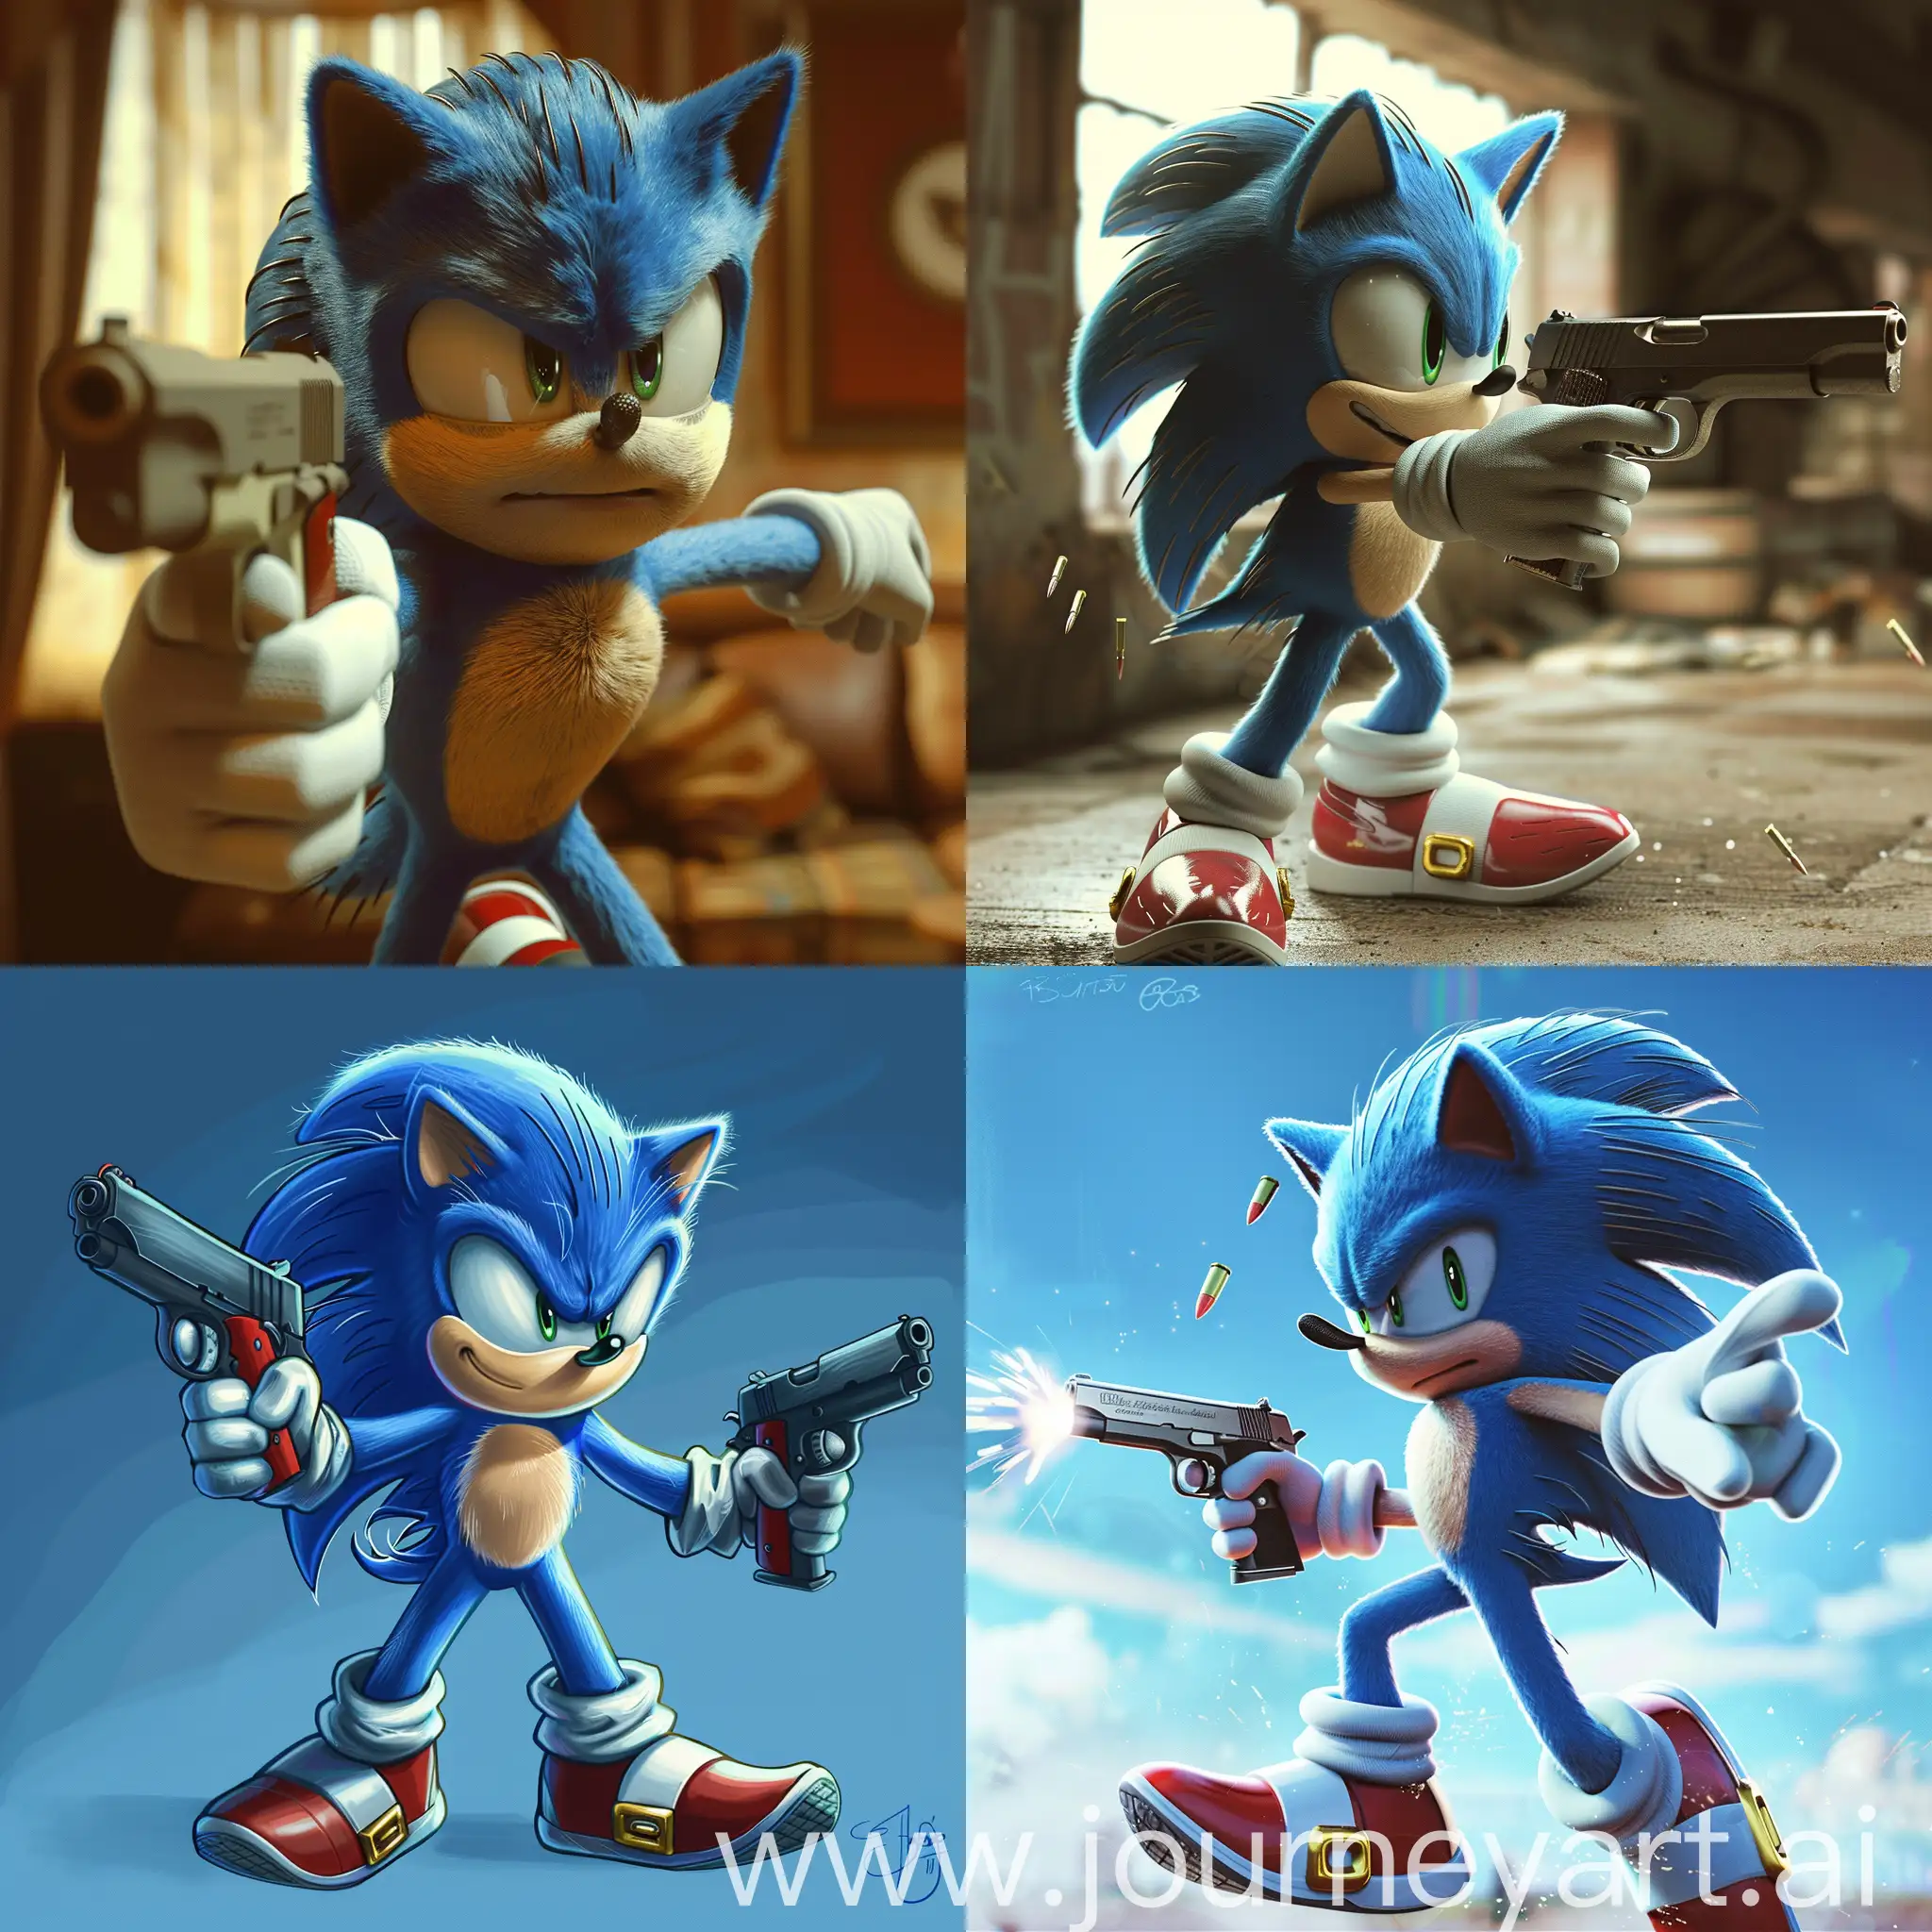 Sonic-the-Hedgehog-with-Firearms-in-Action